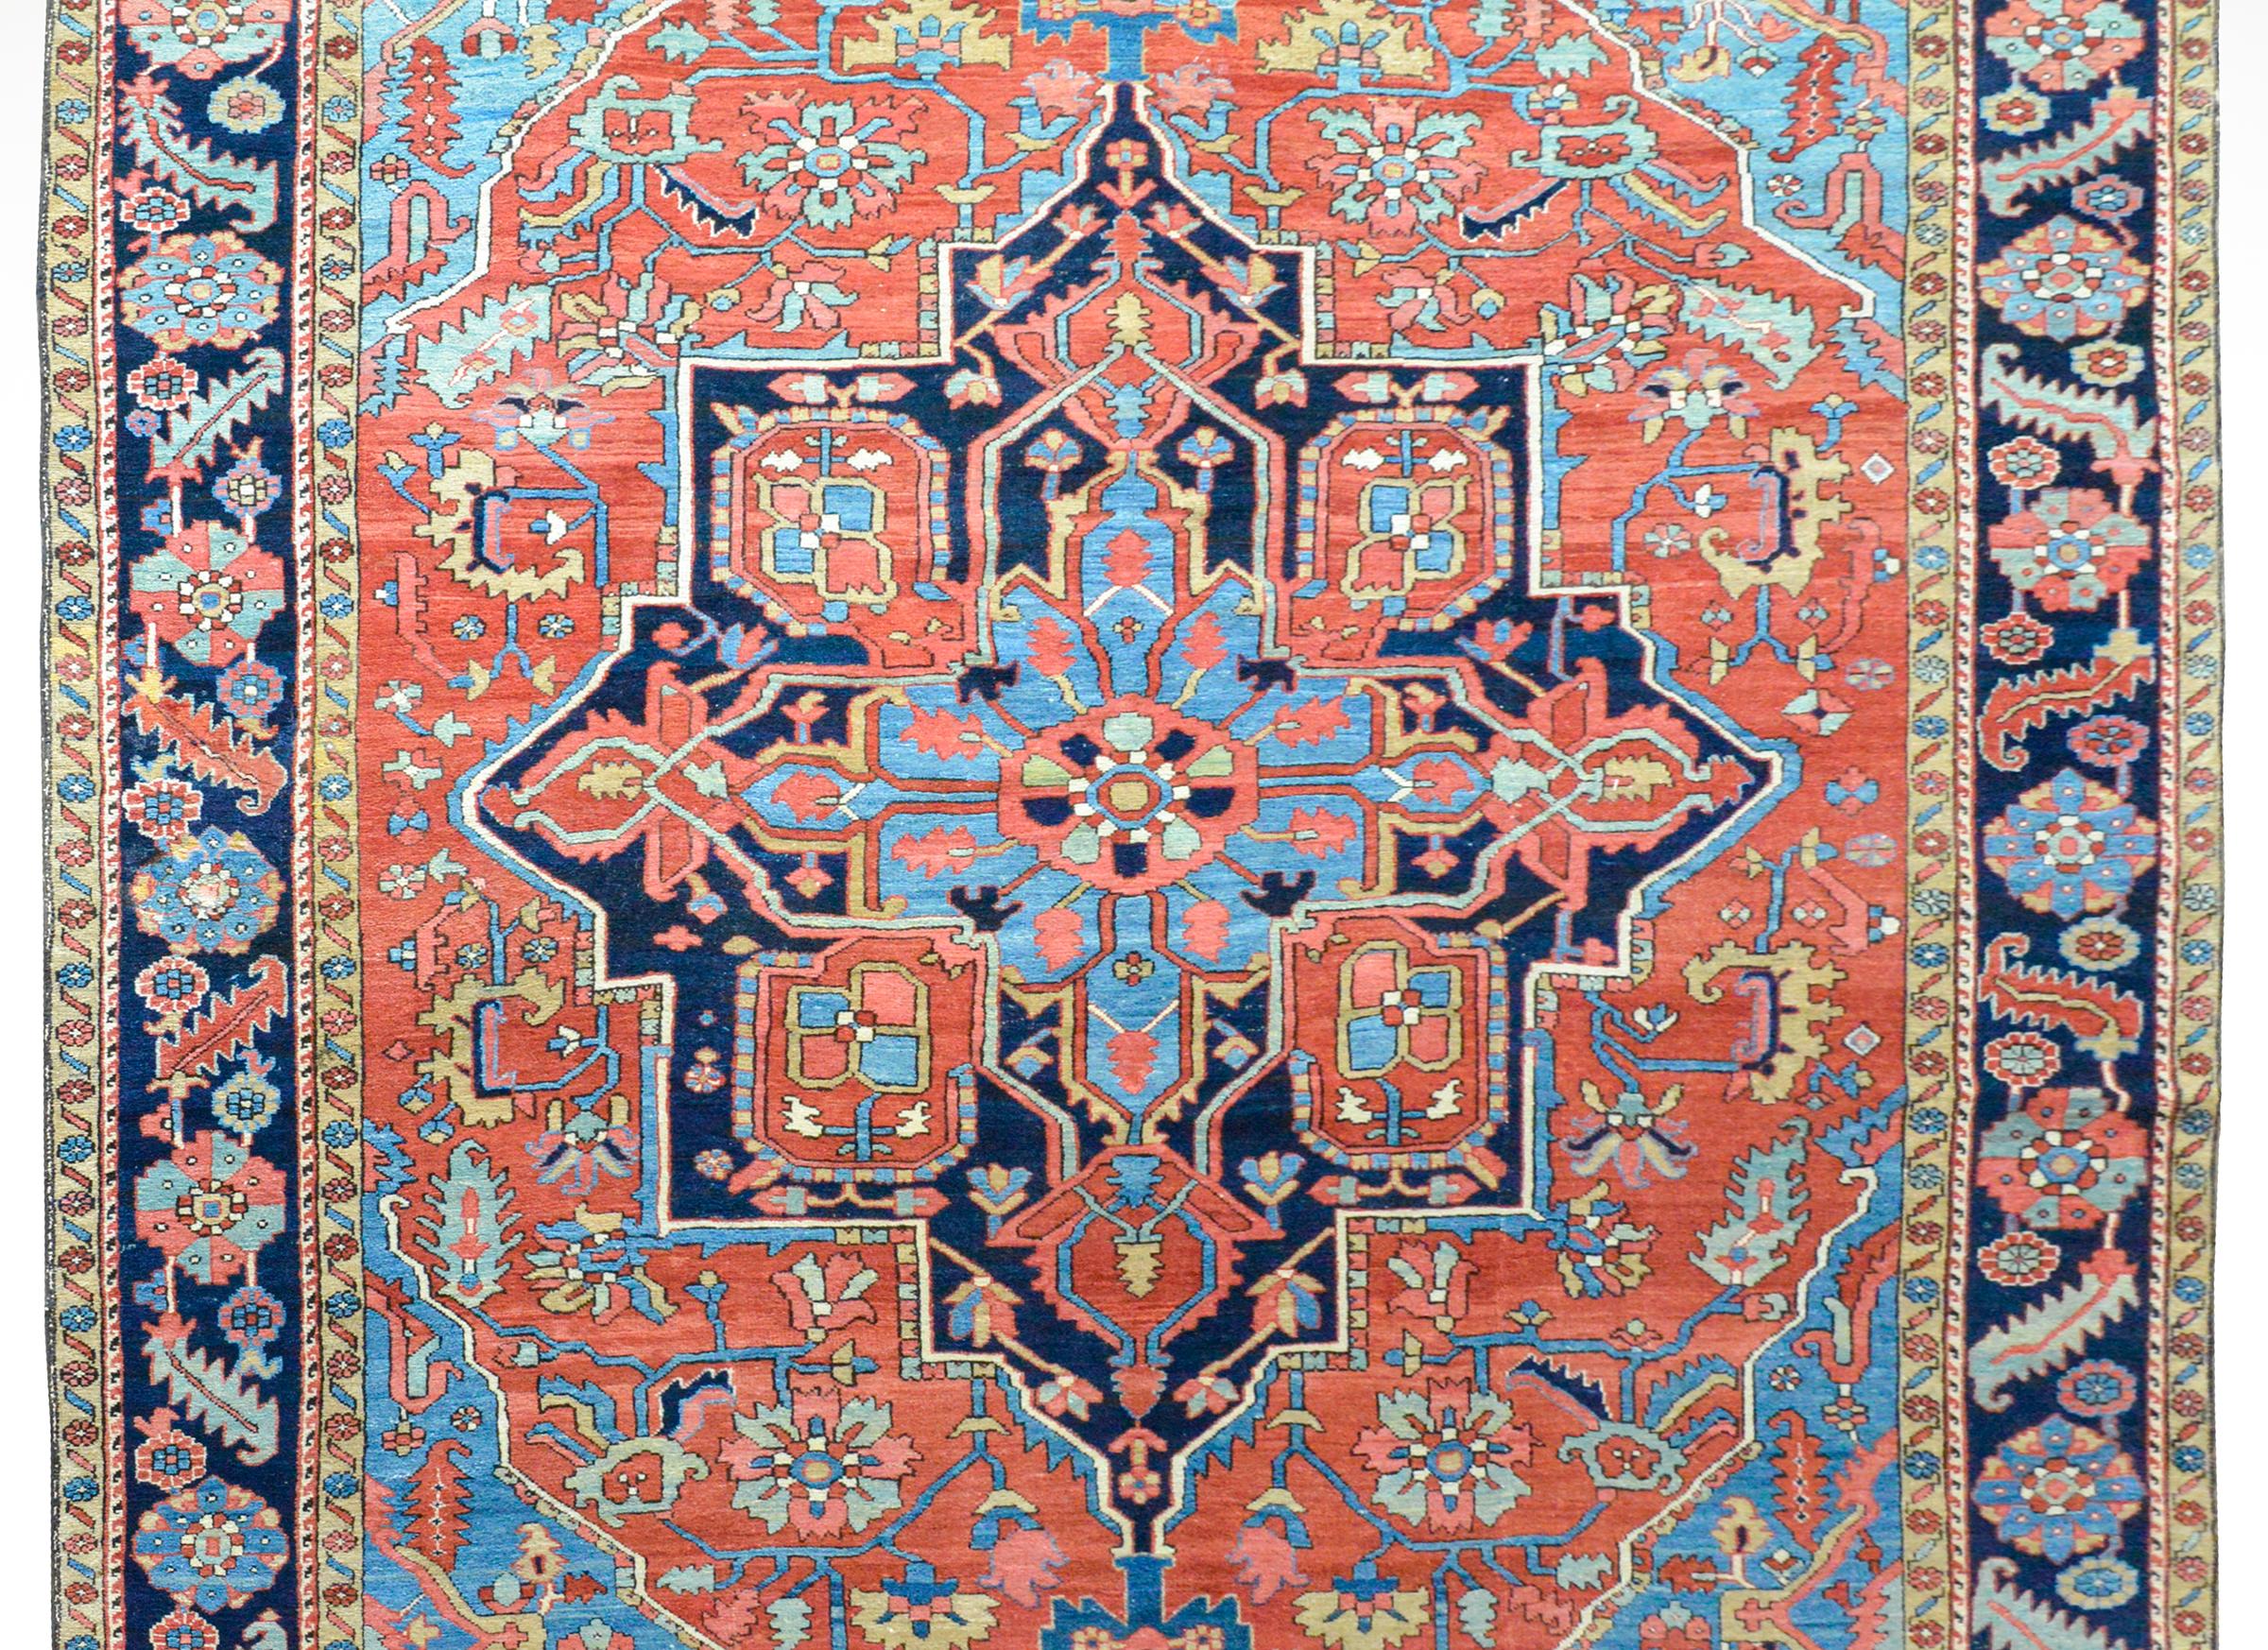 A fantastic early 20th century Persian Serapi rug with a traditional large-scale stylized floral medallion woven in light and dark indigo, pink, gold, and coral against a red background and surrounded by a wide border with a stylized floral pattern